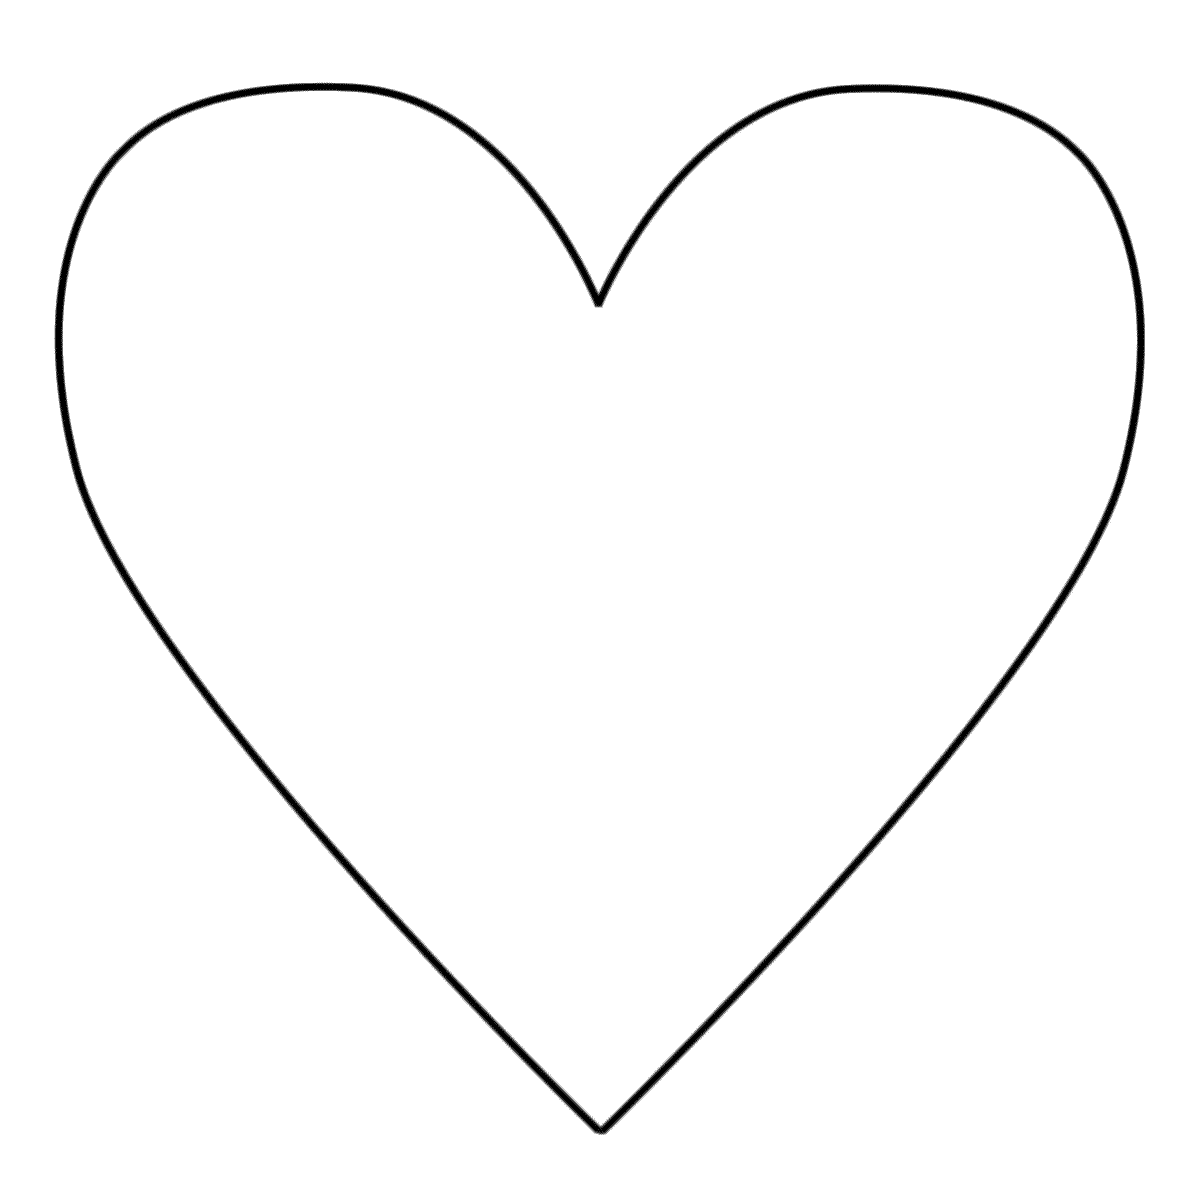 HEARTS COLORING PAGES | Coloringpages321.com